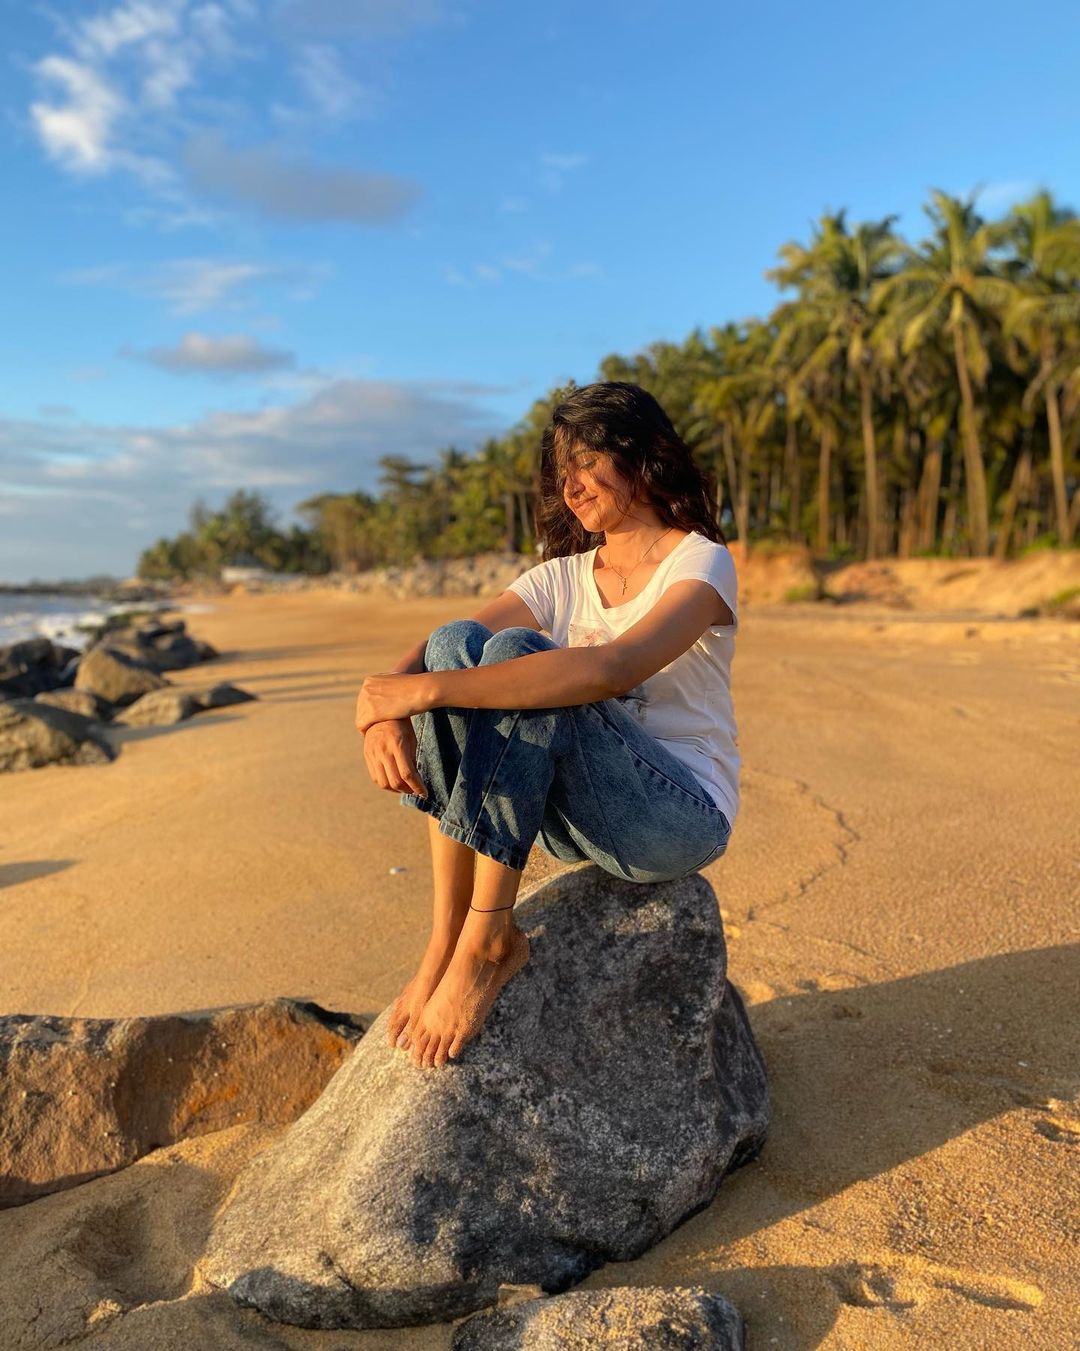 Kushee Ravi sitting on a rock in white t-shirt and blue jeans